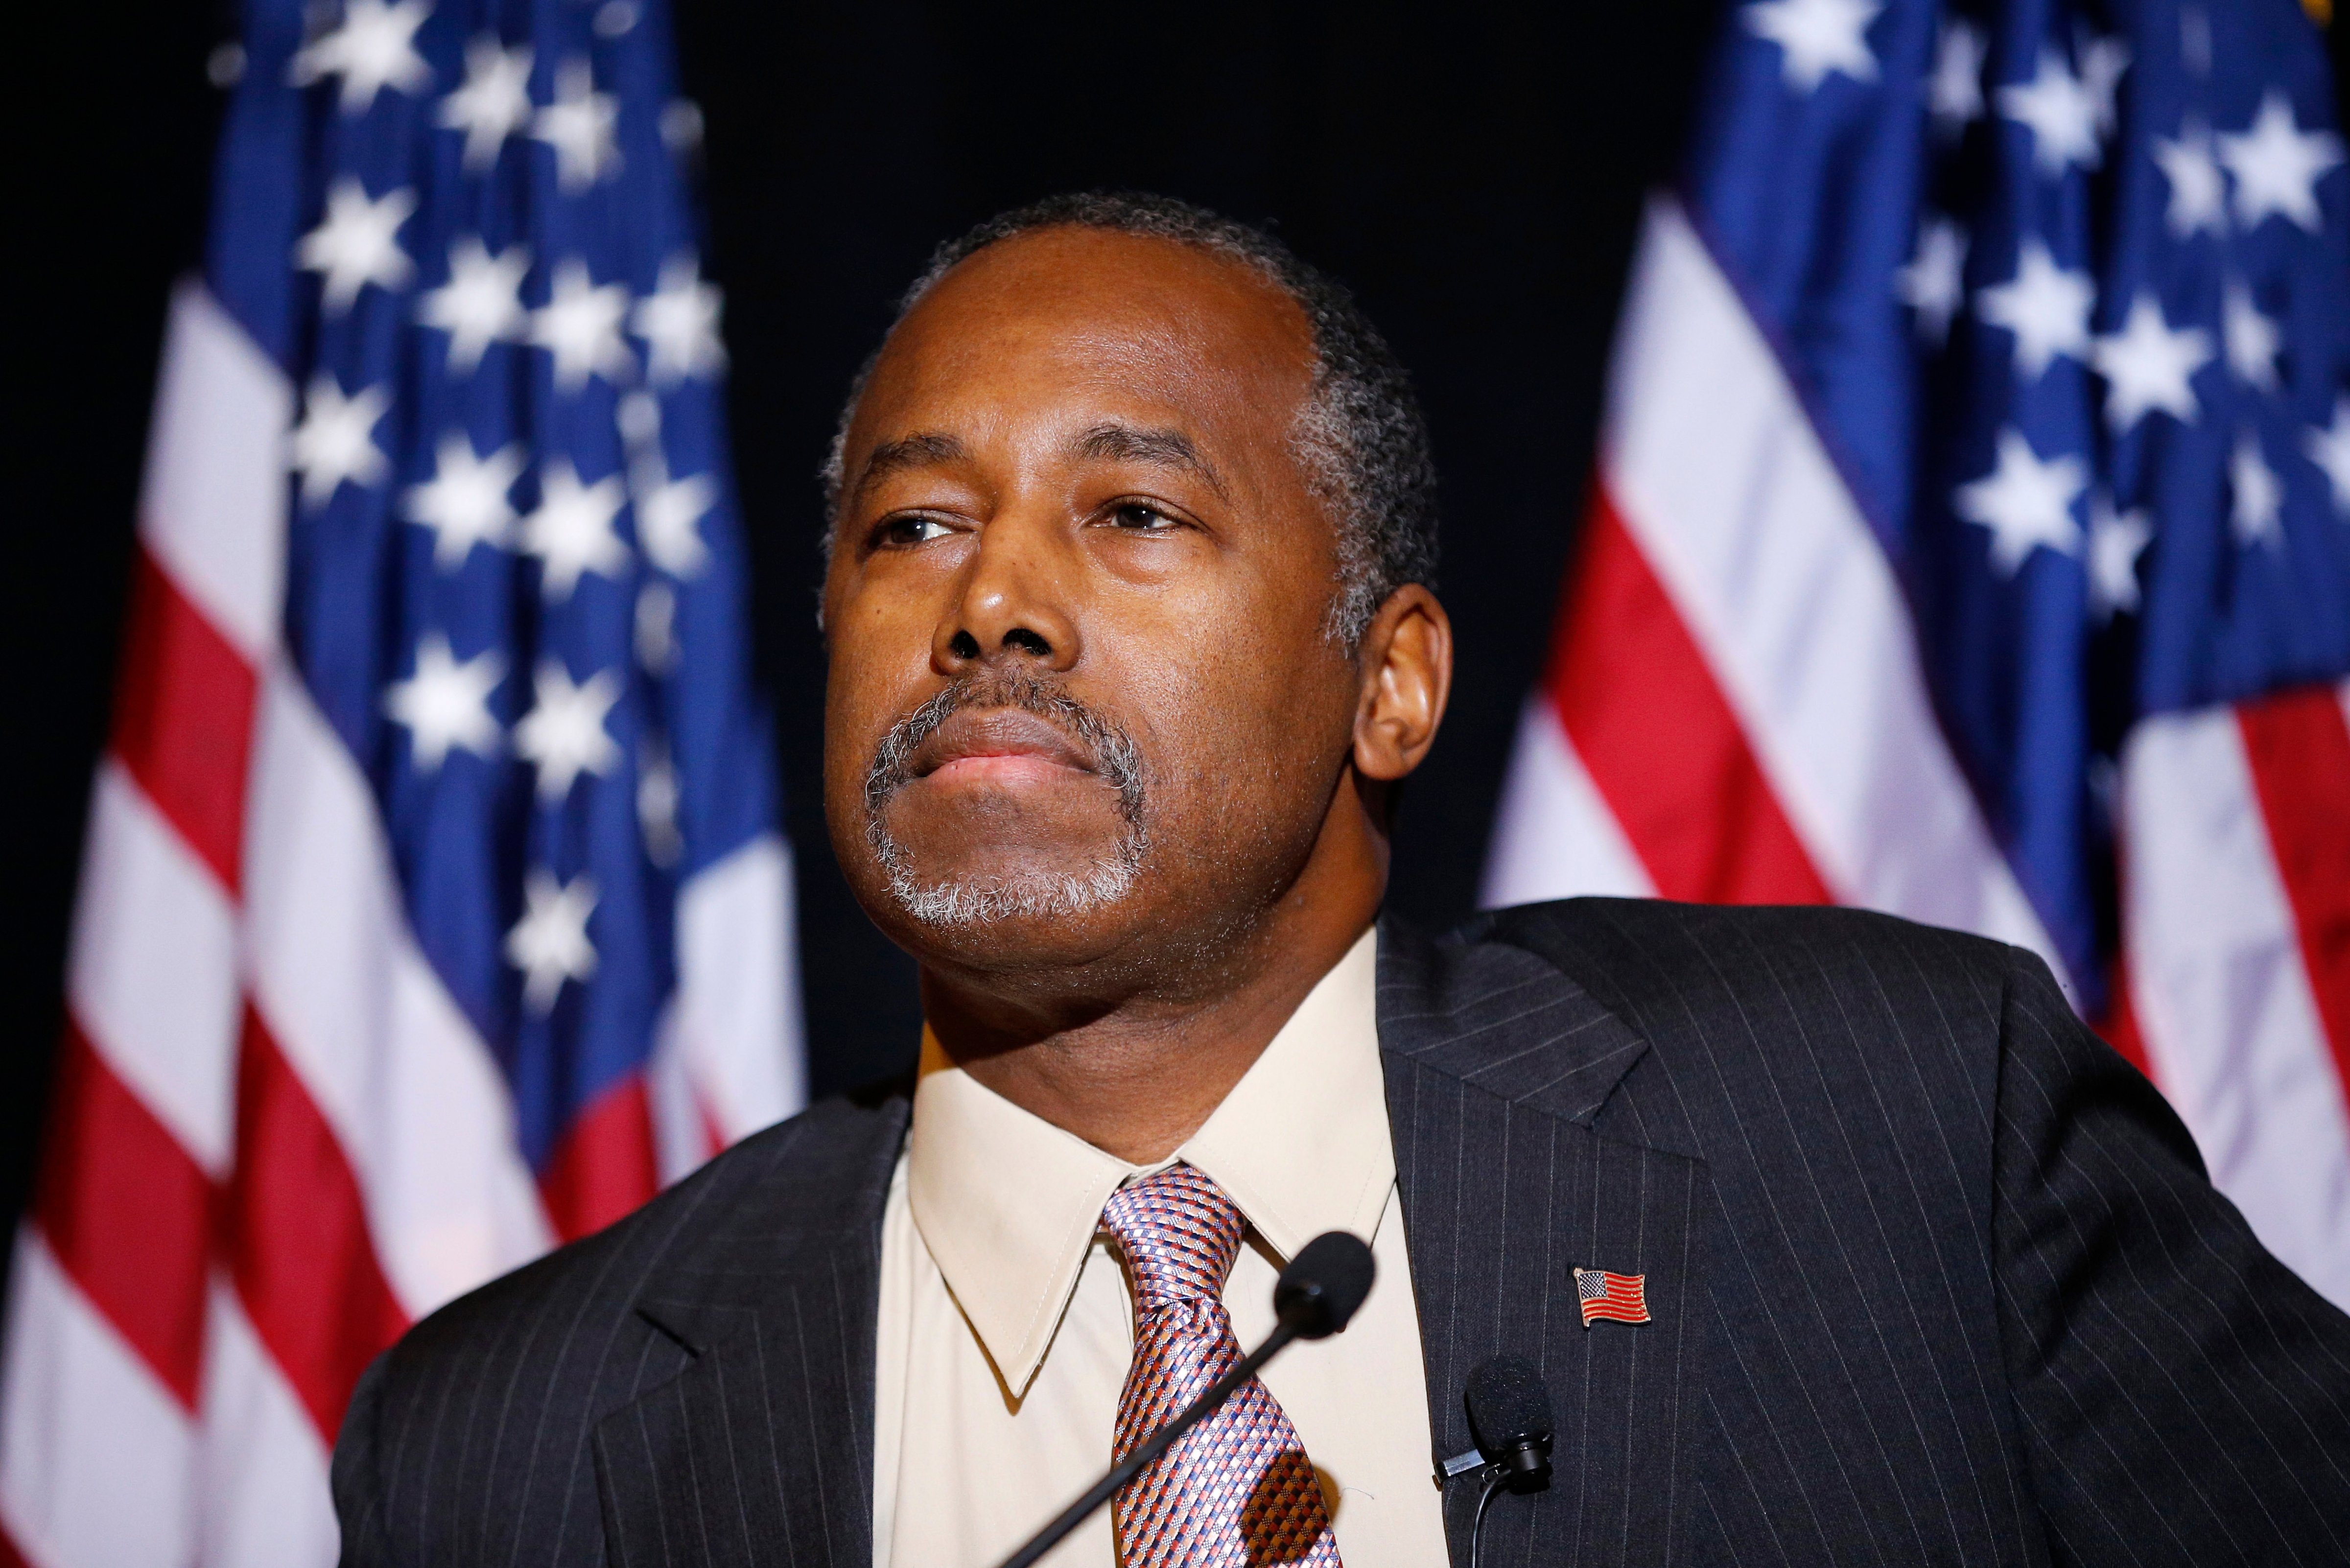 Dr. Ben Carson at a news conference in Henderson, Nev. on  Nov. 16, 2015. (John Locher—AP)